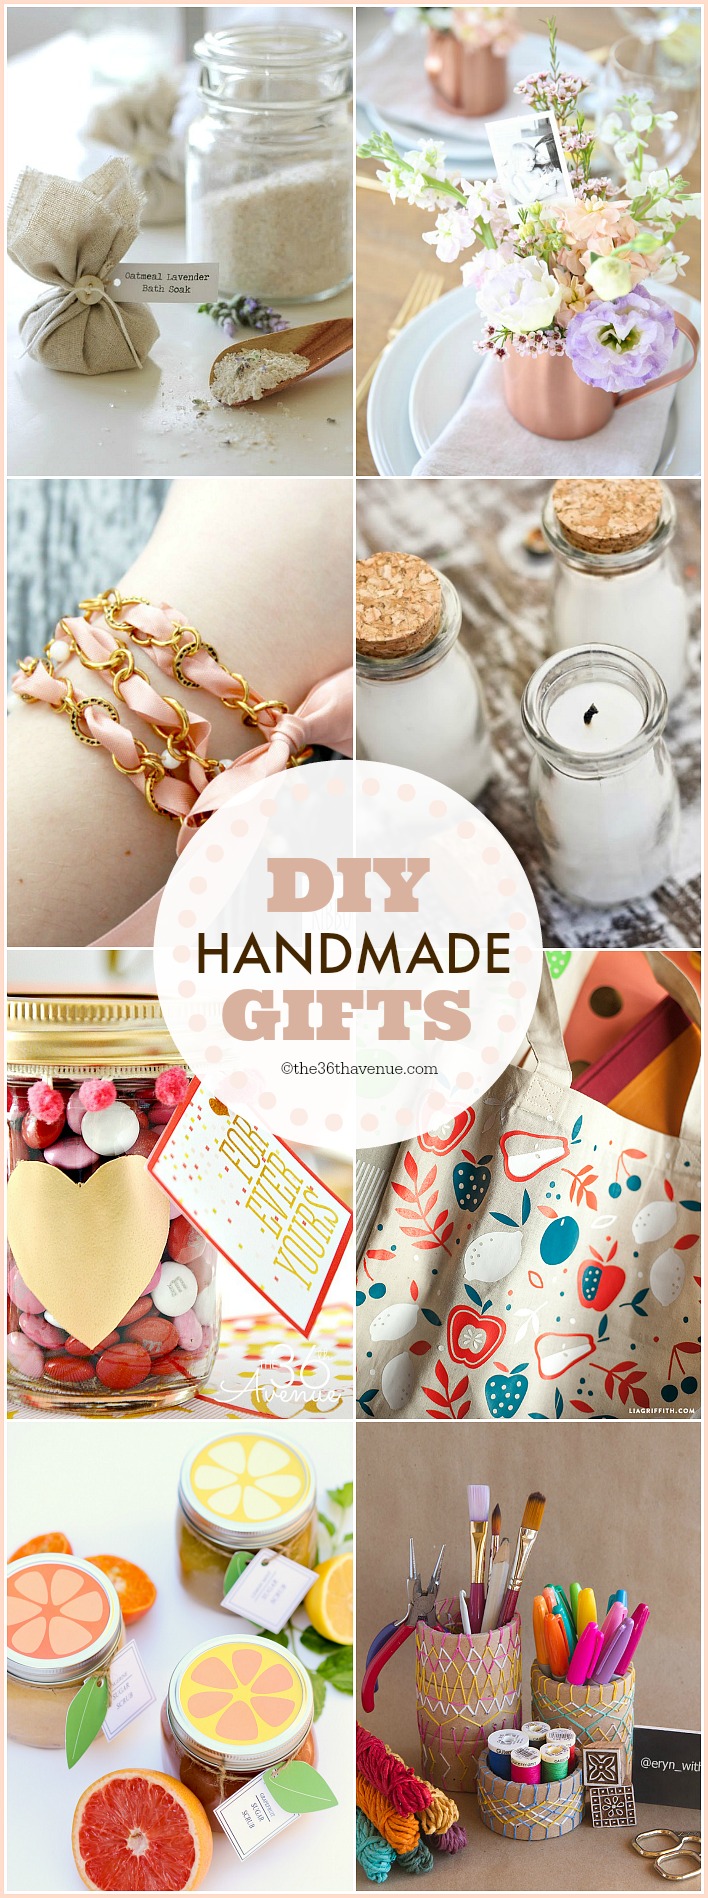 DIY Handmade Gifts at the36thavenue.com Pin it now and make them later!